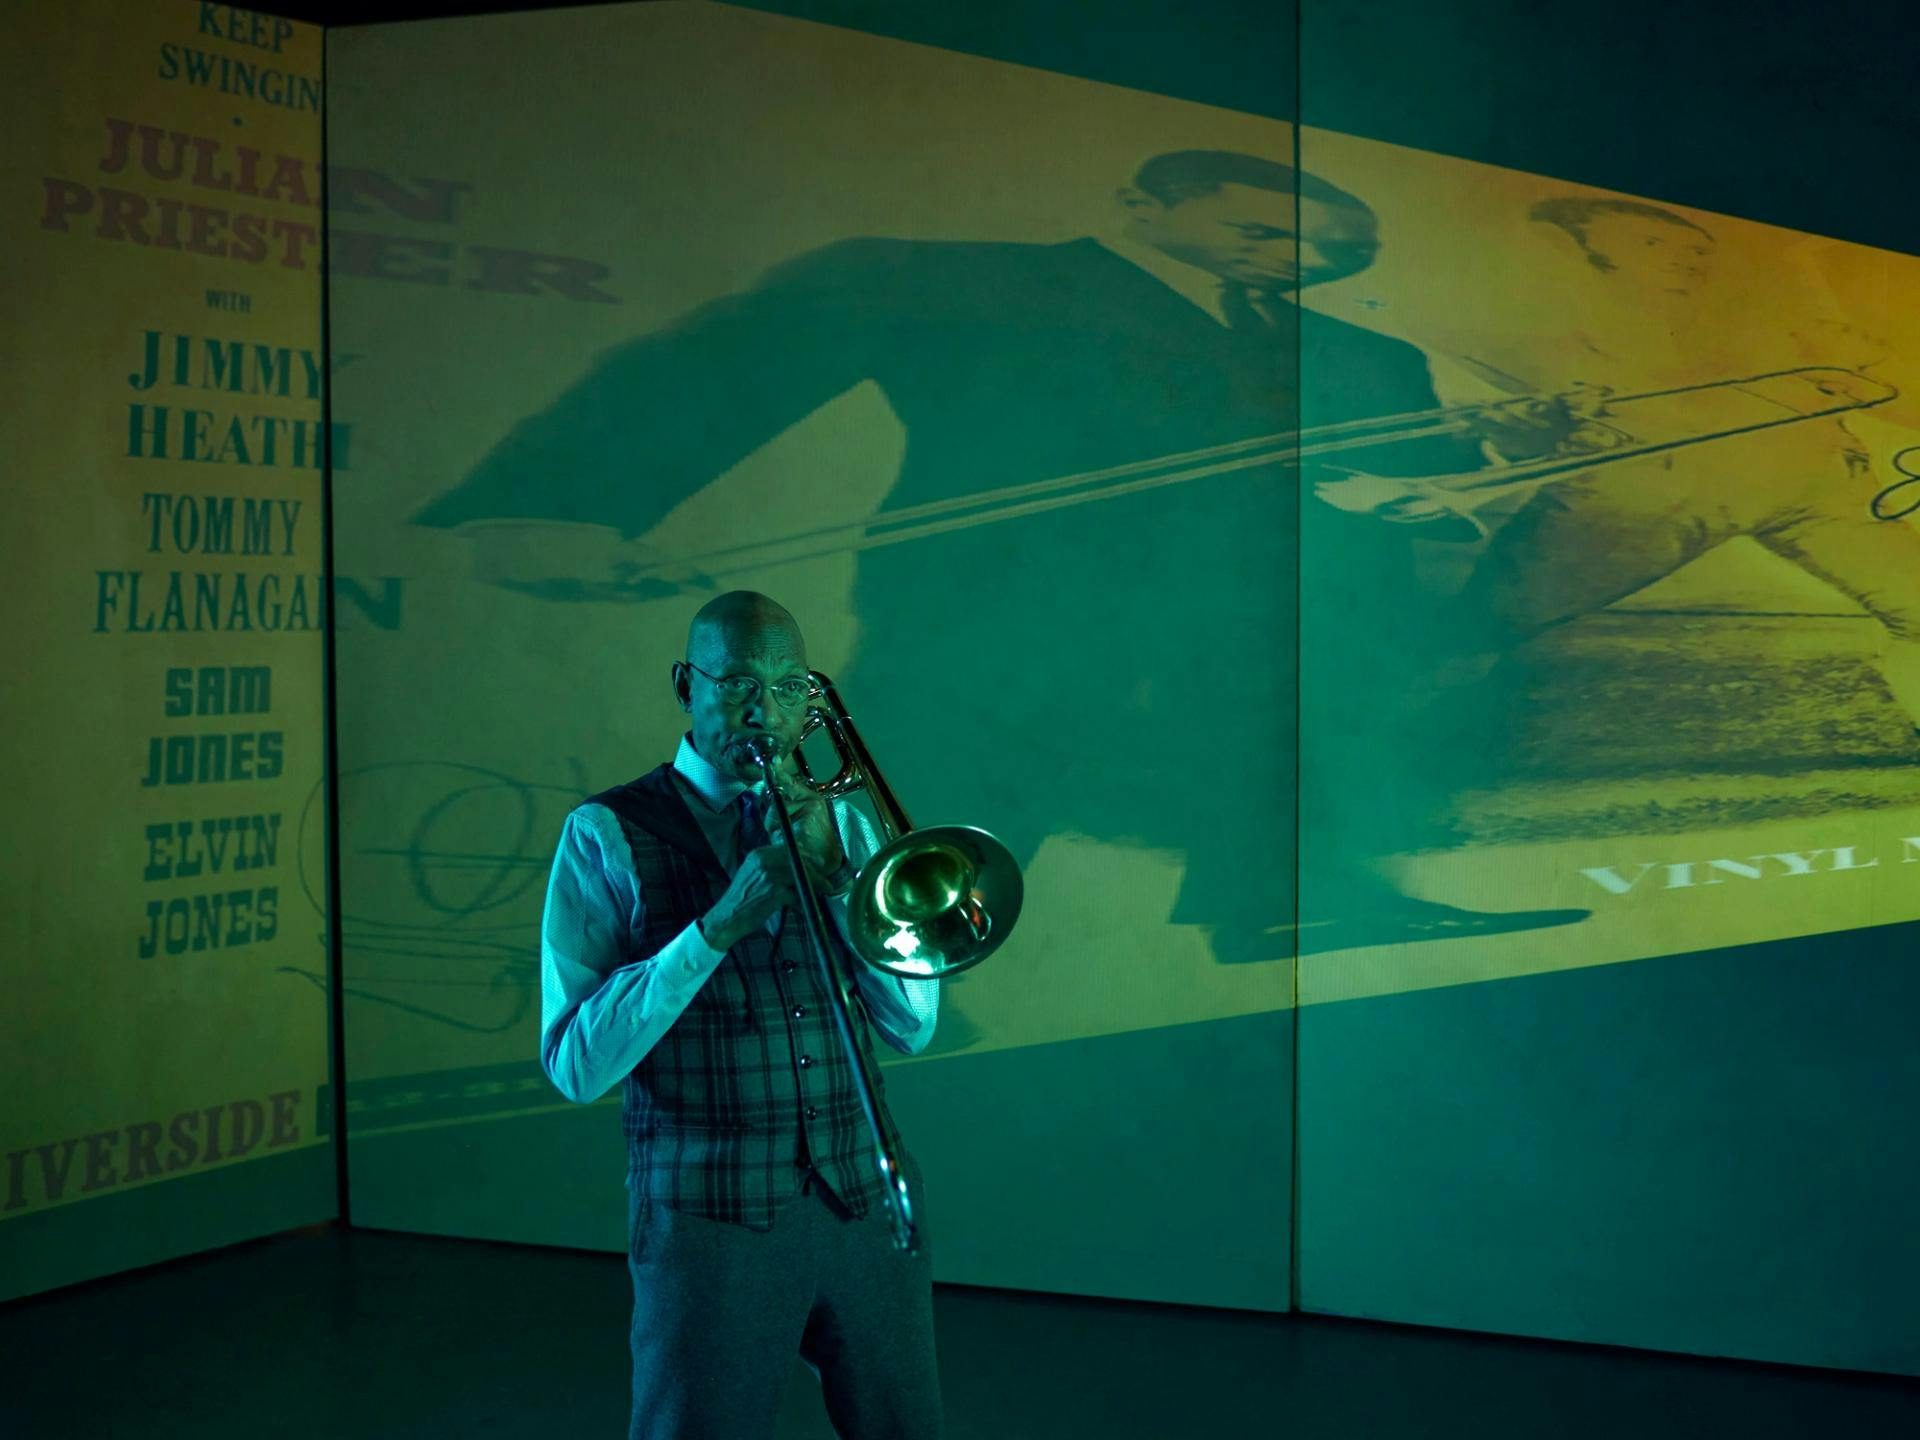 A man plays a trombone in front of a projection